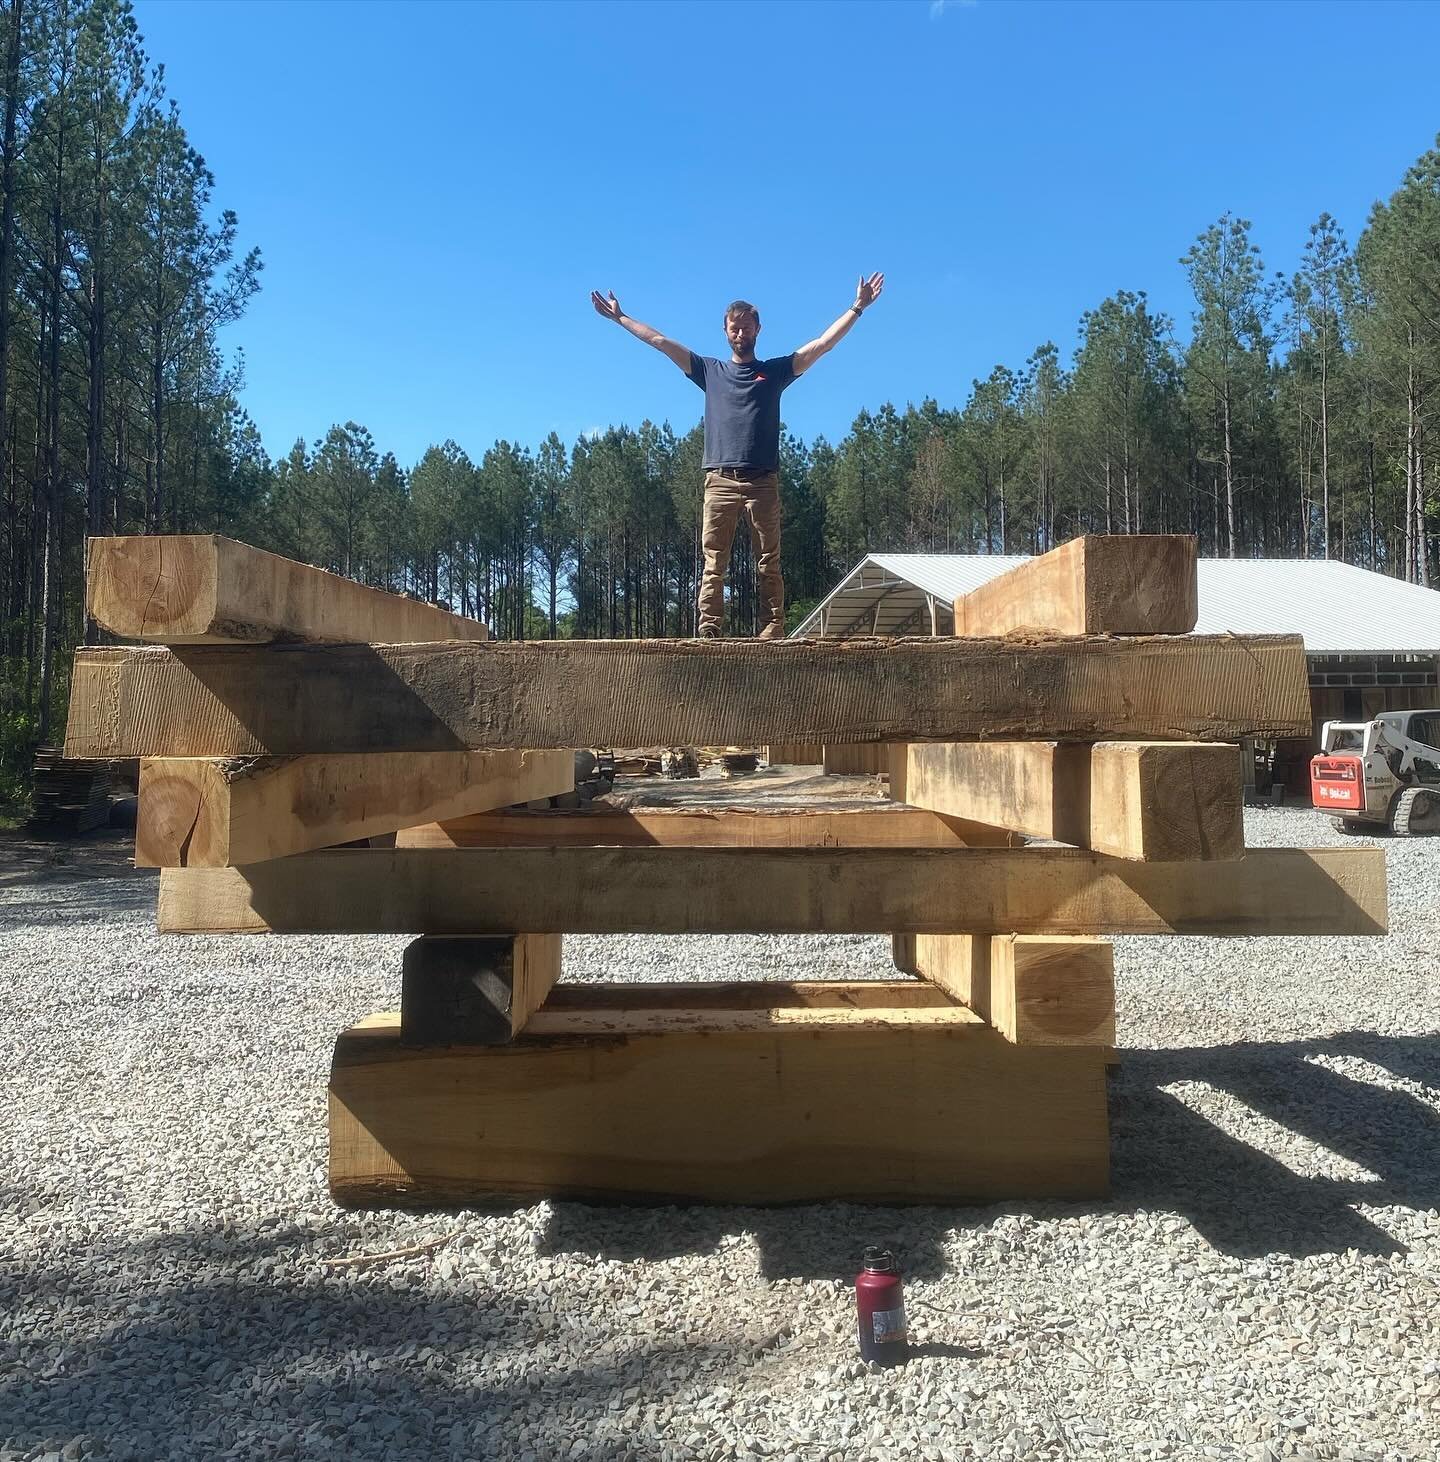 We&rsquo;re expecting 500 to 900 visitors this weekend as a part of the @carolinafarms farm tour. I told my guys we needed to think about seating and, after I returned from a meeting, Liam had built this weird inverted pyramid. It was stable and safe